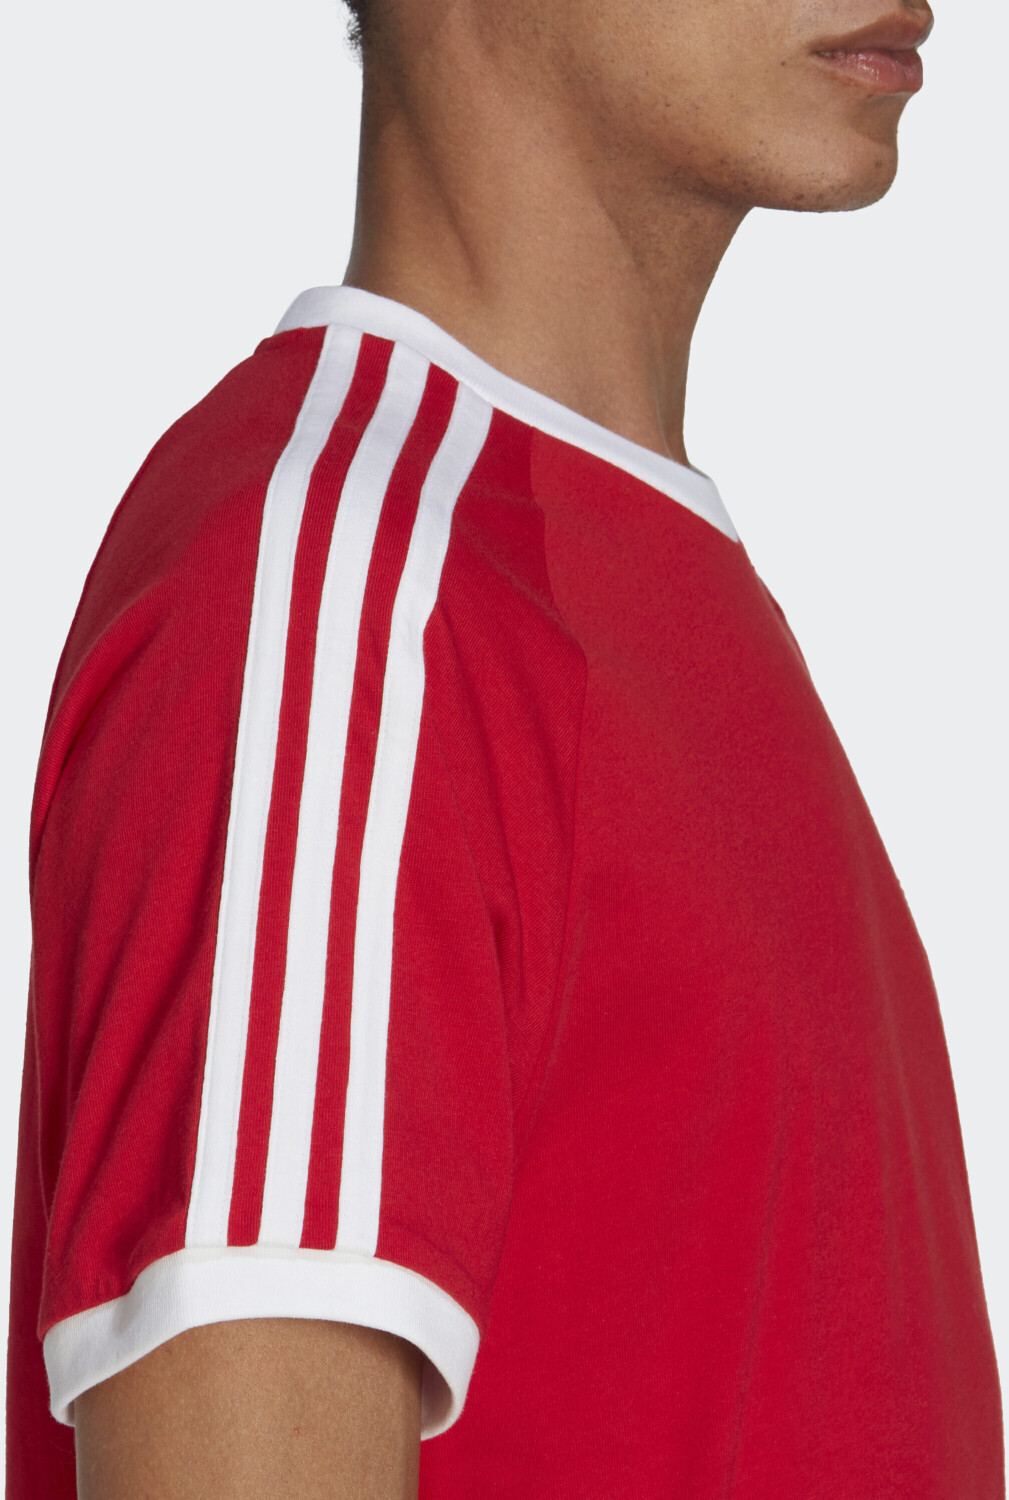 Buy Adidas Adicolor Classics 3-Stripes scarlet (IA4852) on (Today) – Best better £27.99 Deals T-Shirt from